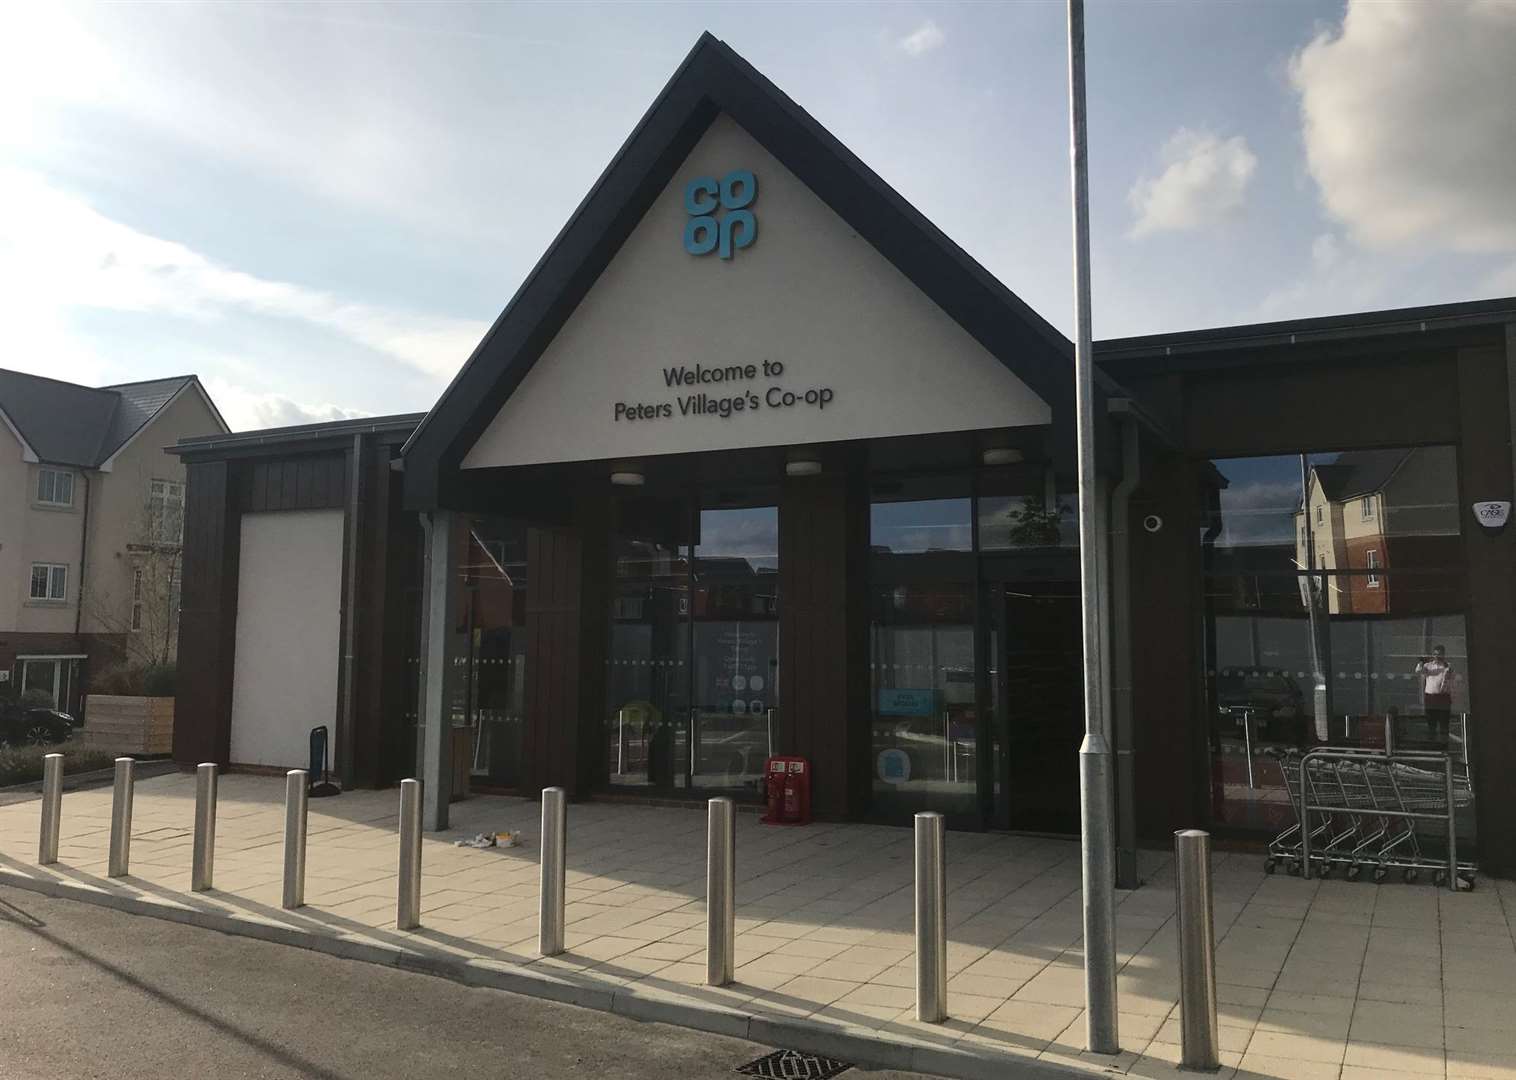 The new Co-op at Peters Village, Wouldham